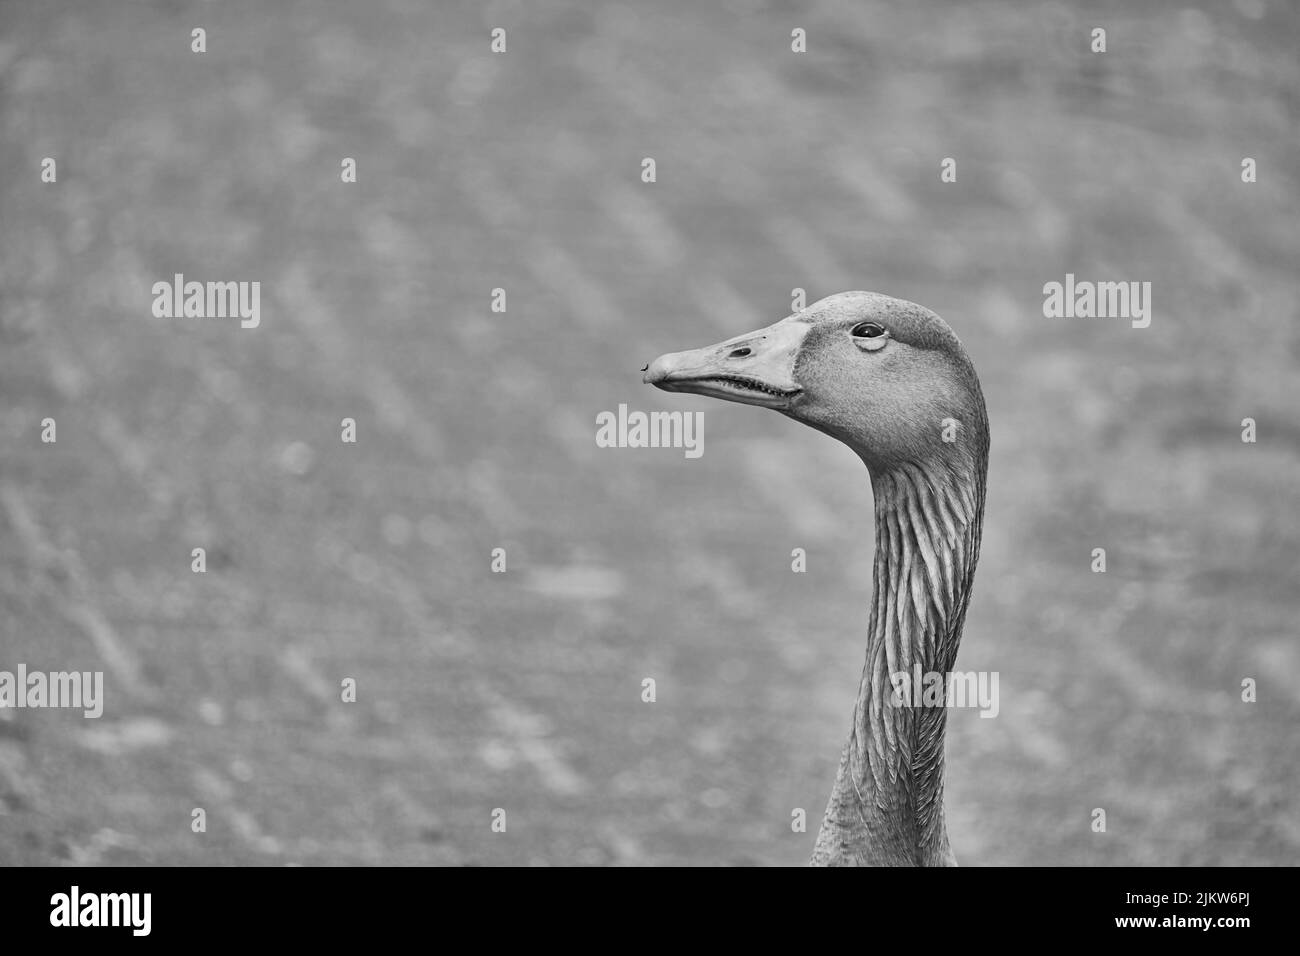 A selective focus shot of the head of a goose Stock Photo